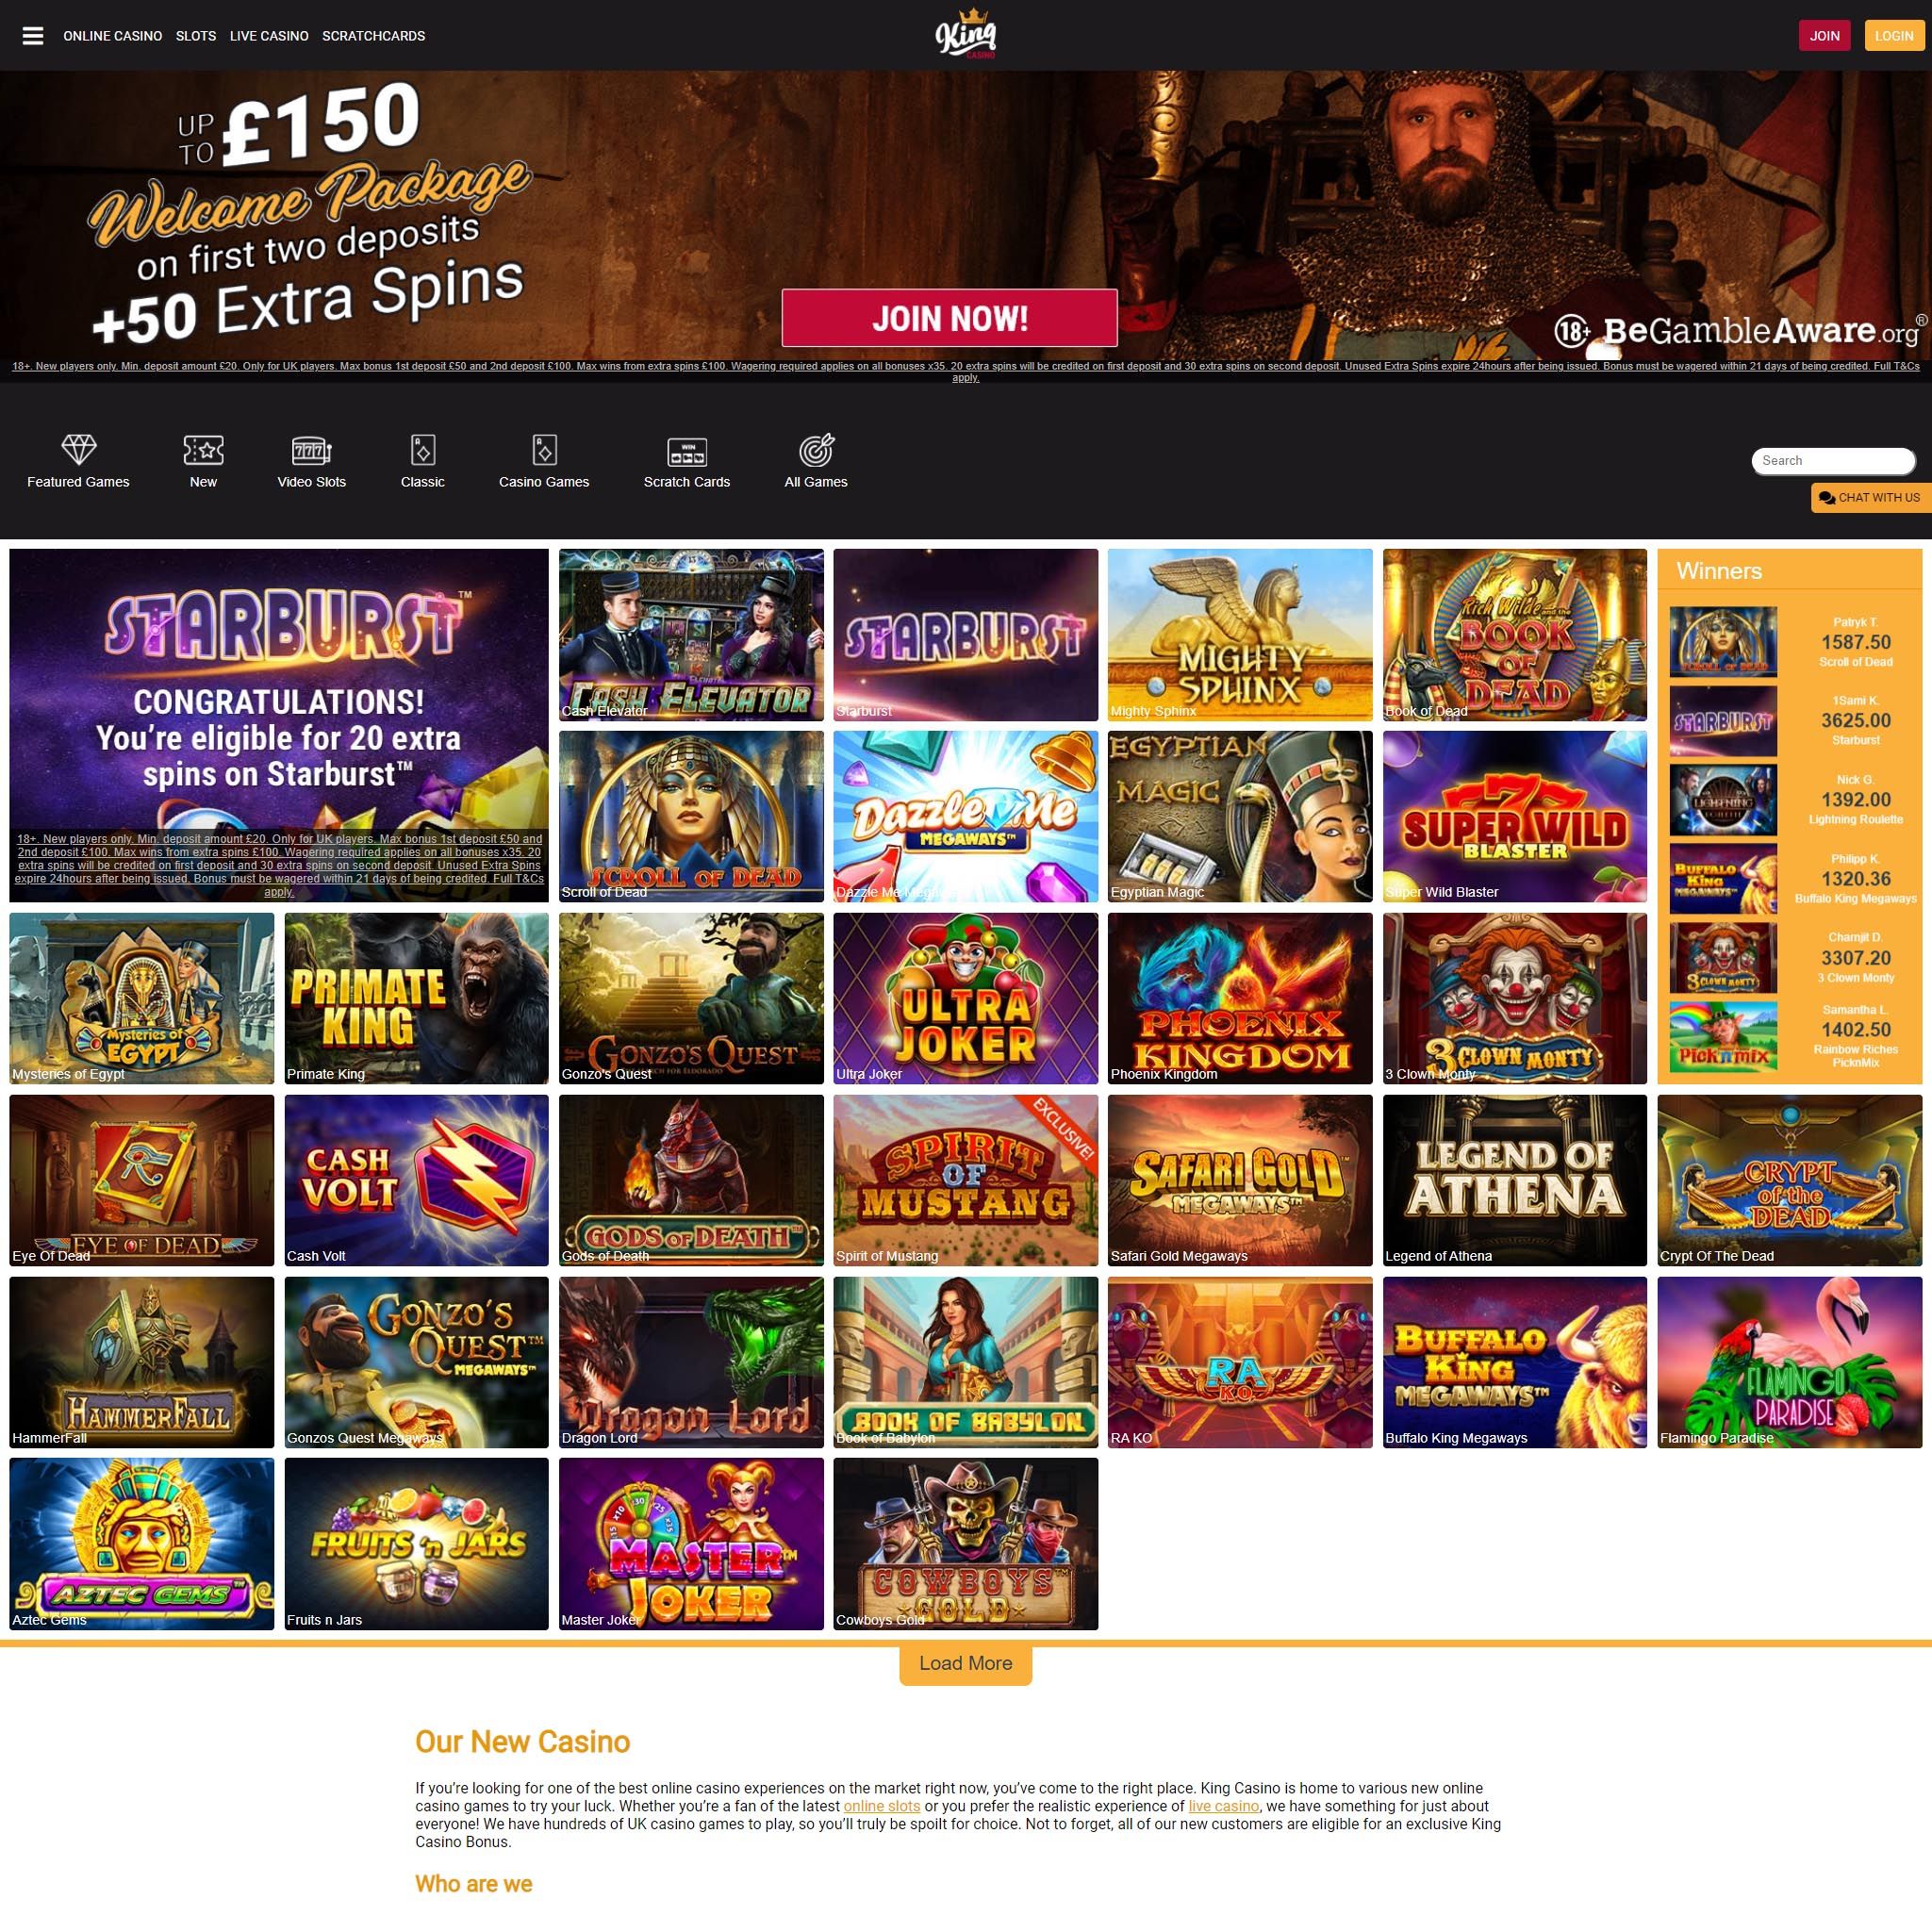 King Casino UK review by Mr. Gamble